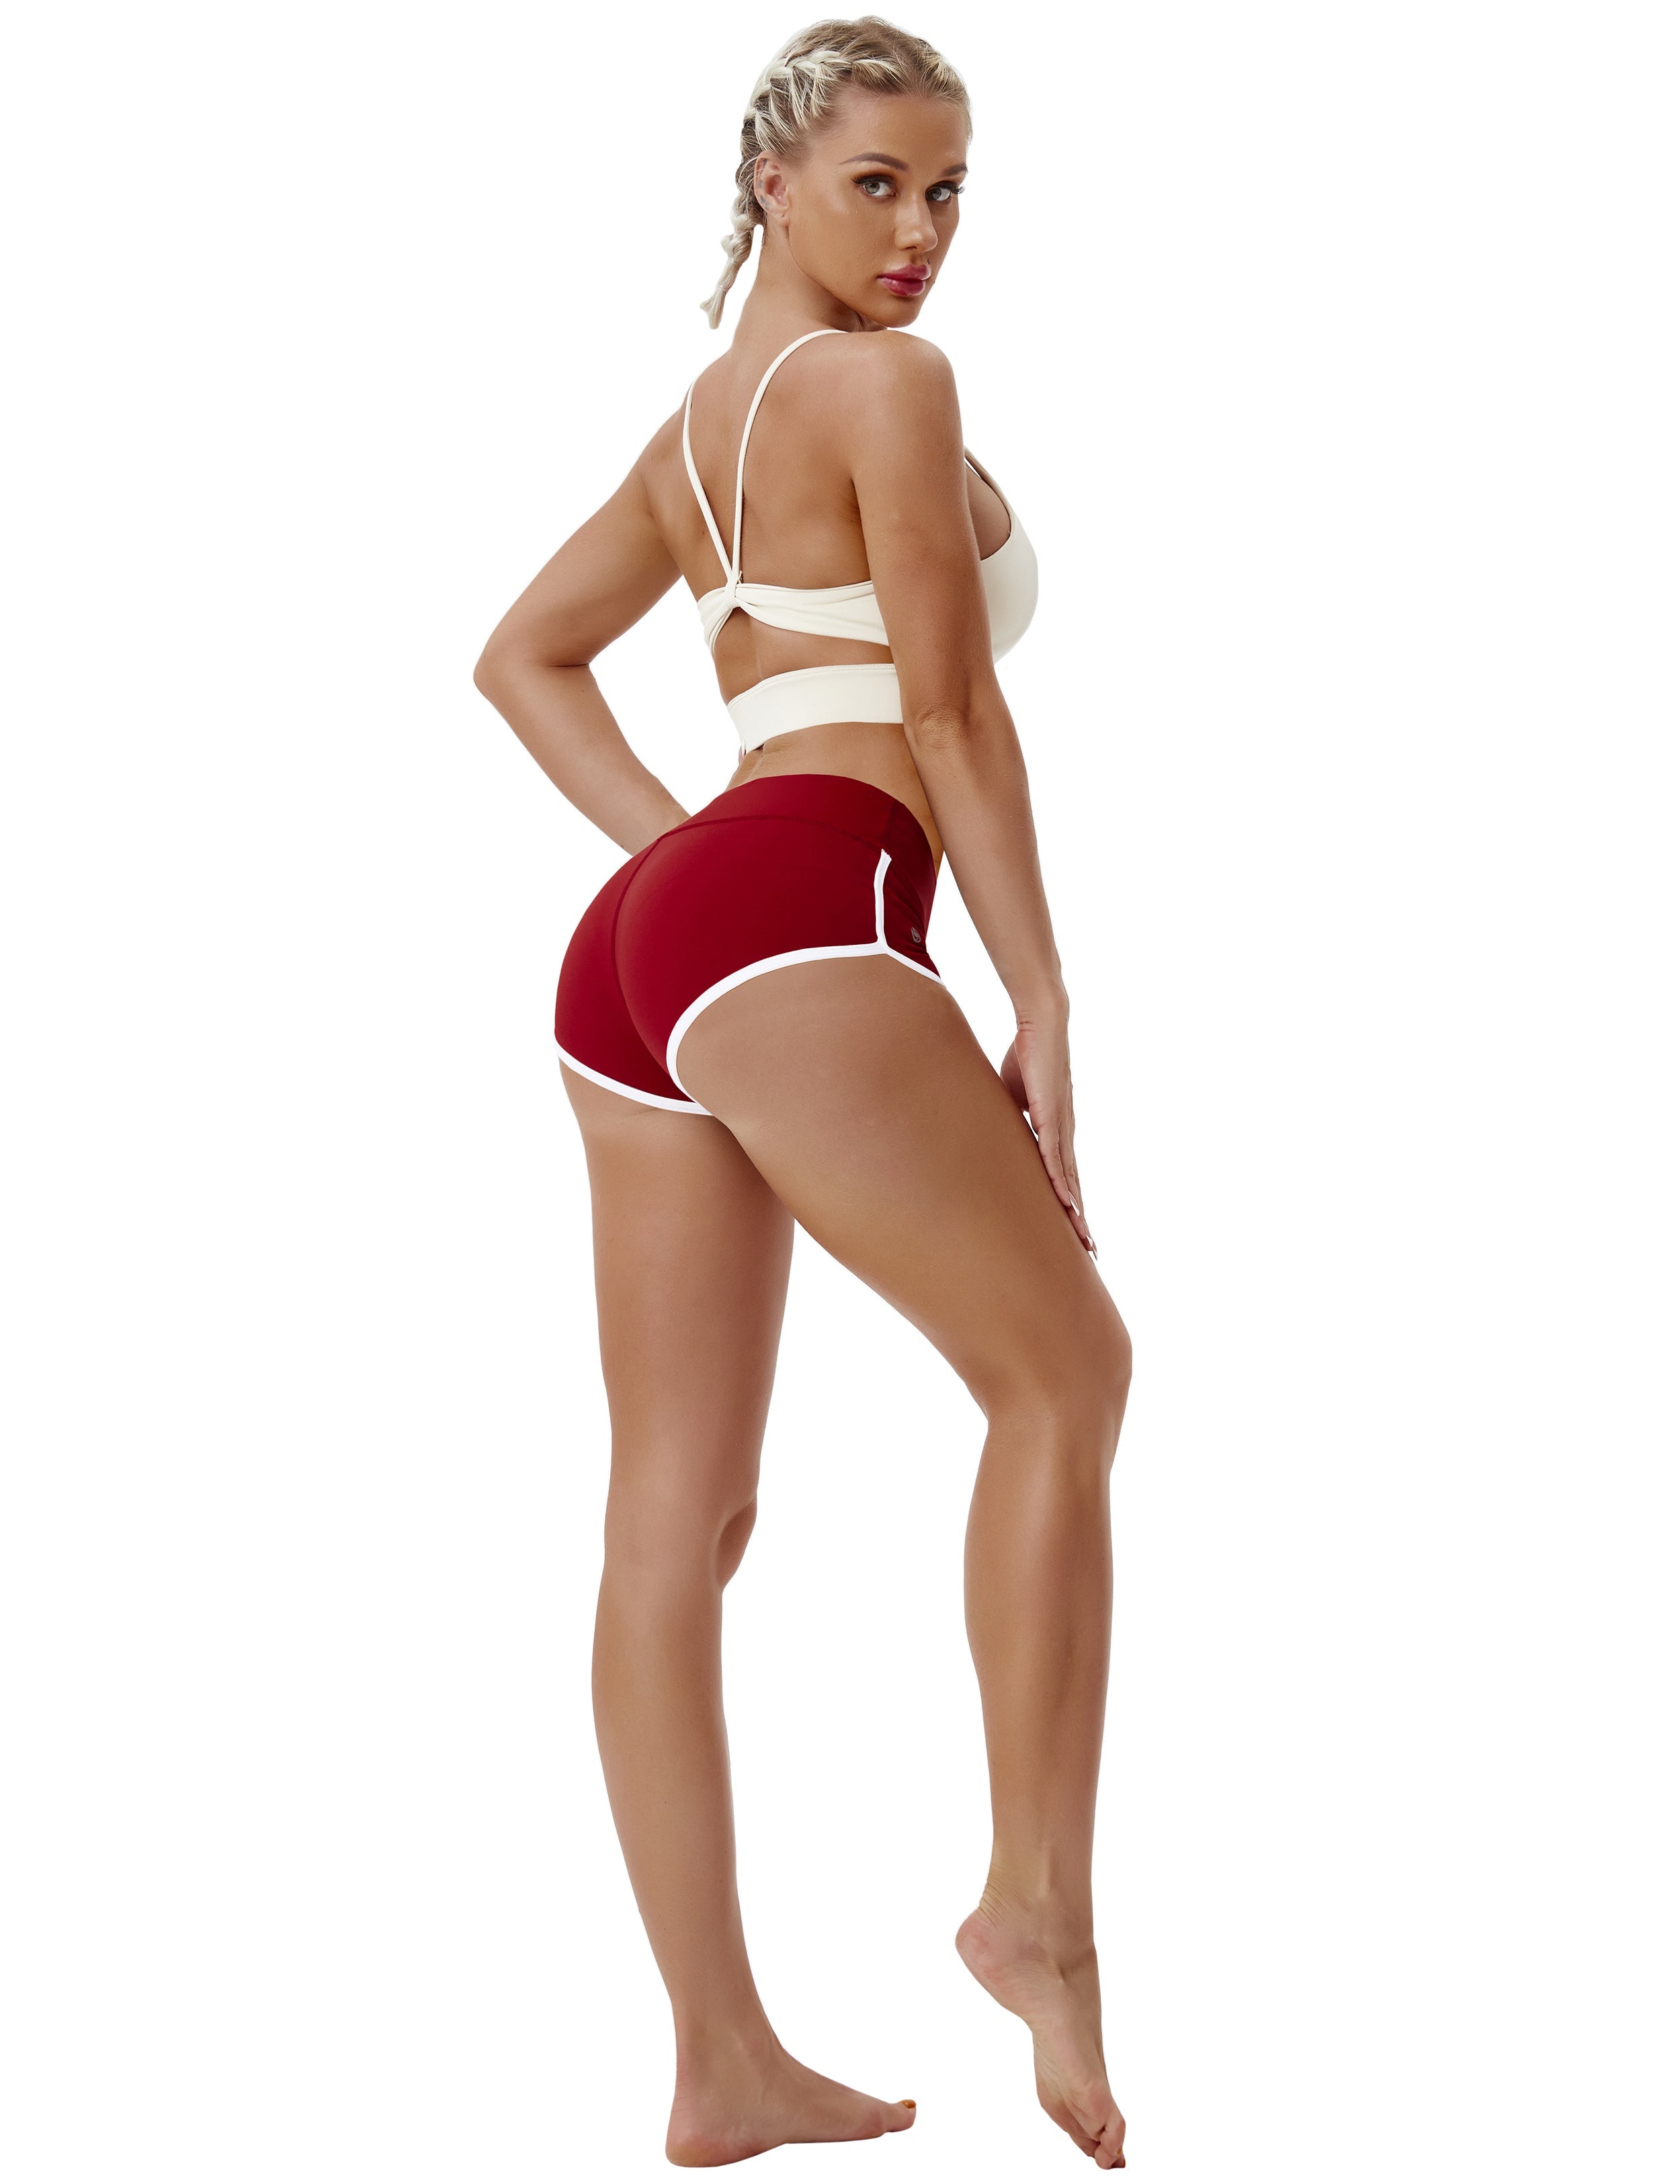 Sexy Booty Yoga Shorts cherryred Sleek, soft, smooth and totally comfortable: our newest sexy style is here. Softest-ever fabric High elasticity High density 4-way stretch Fabric doesn't attract lint easily No see-through Moisture-wicking Machine wash 75%Nylon/25%Spandex